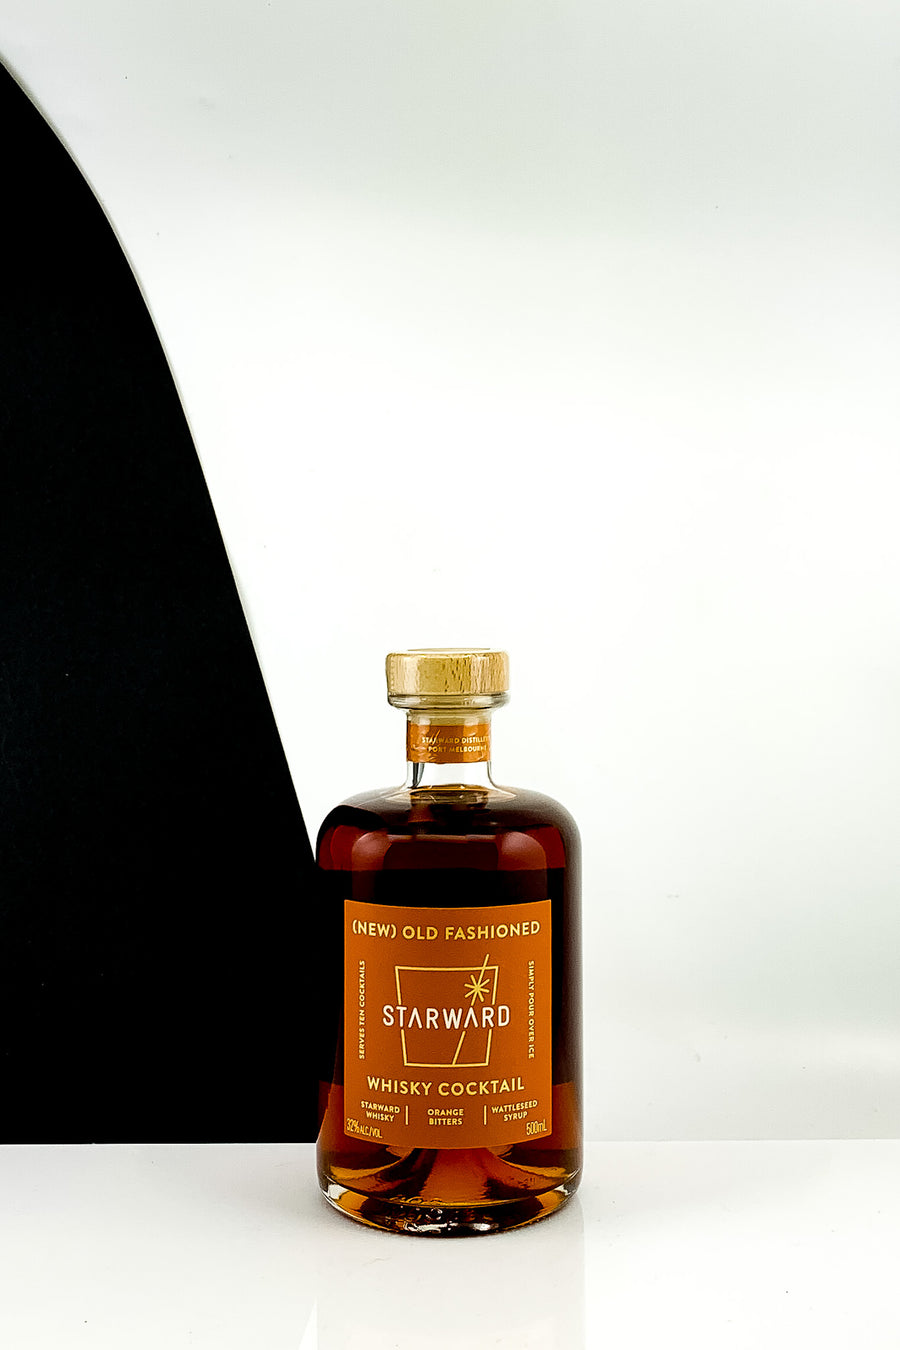 Starward Distillery Whisky (New) Old Fashioned